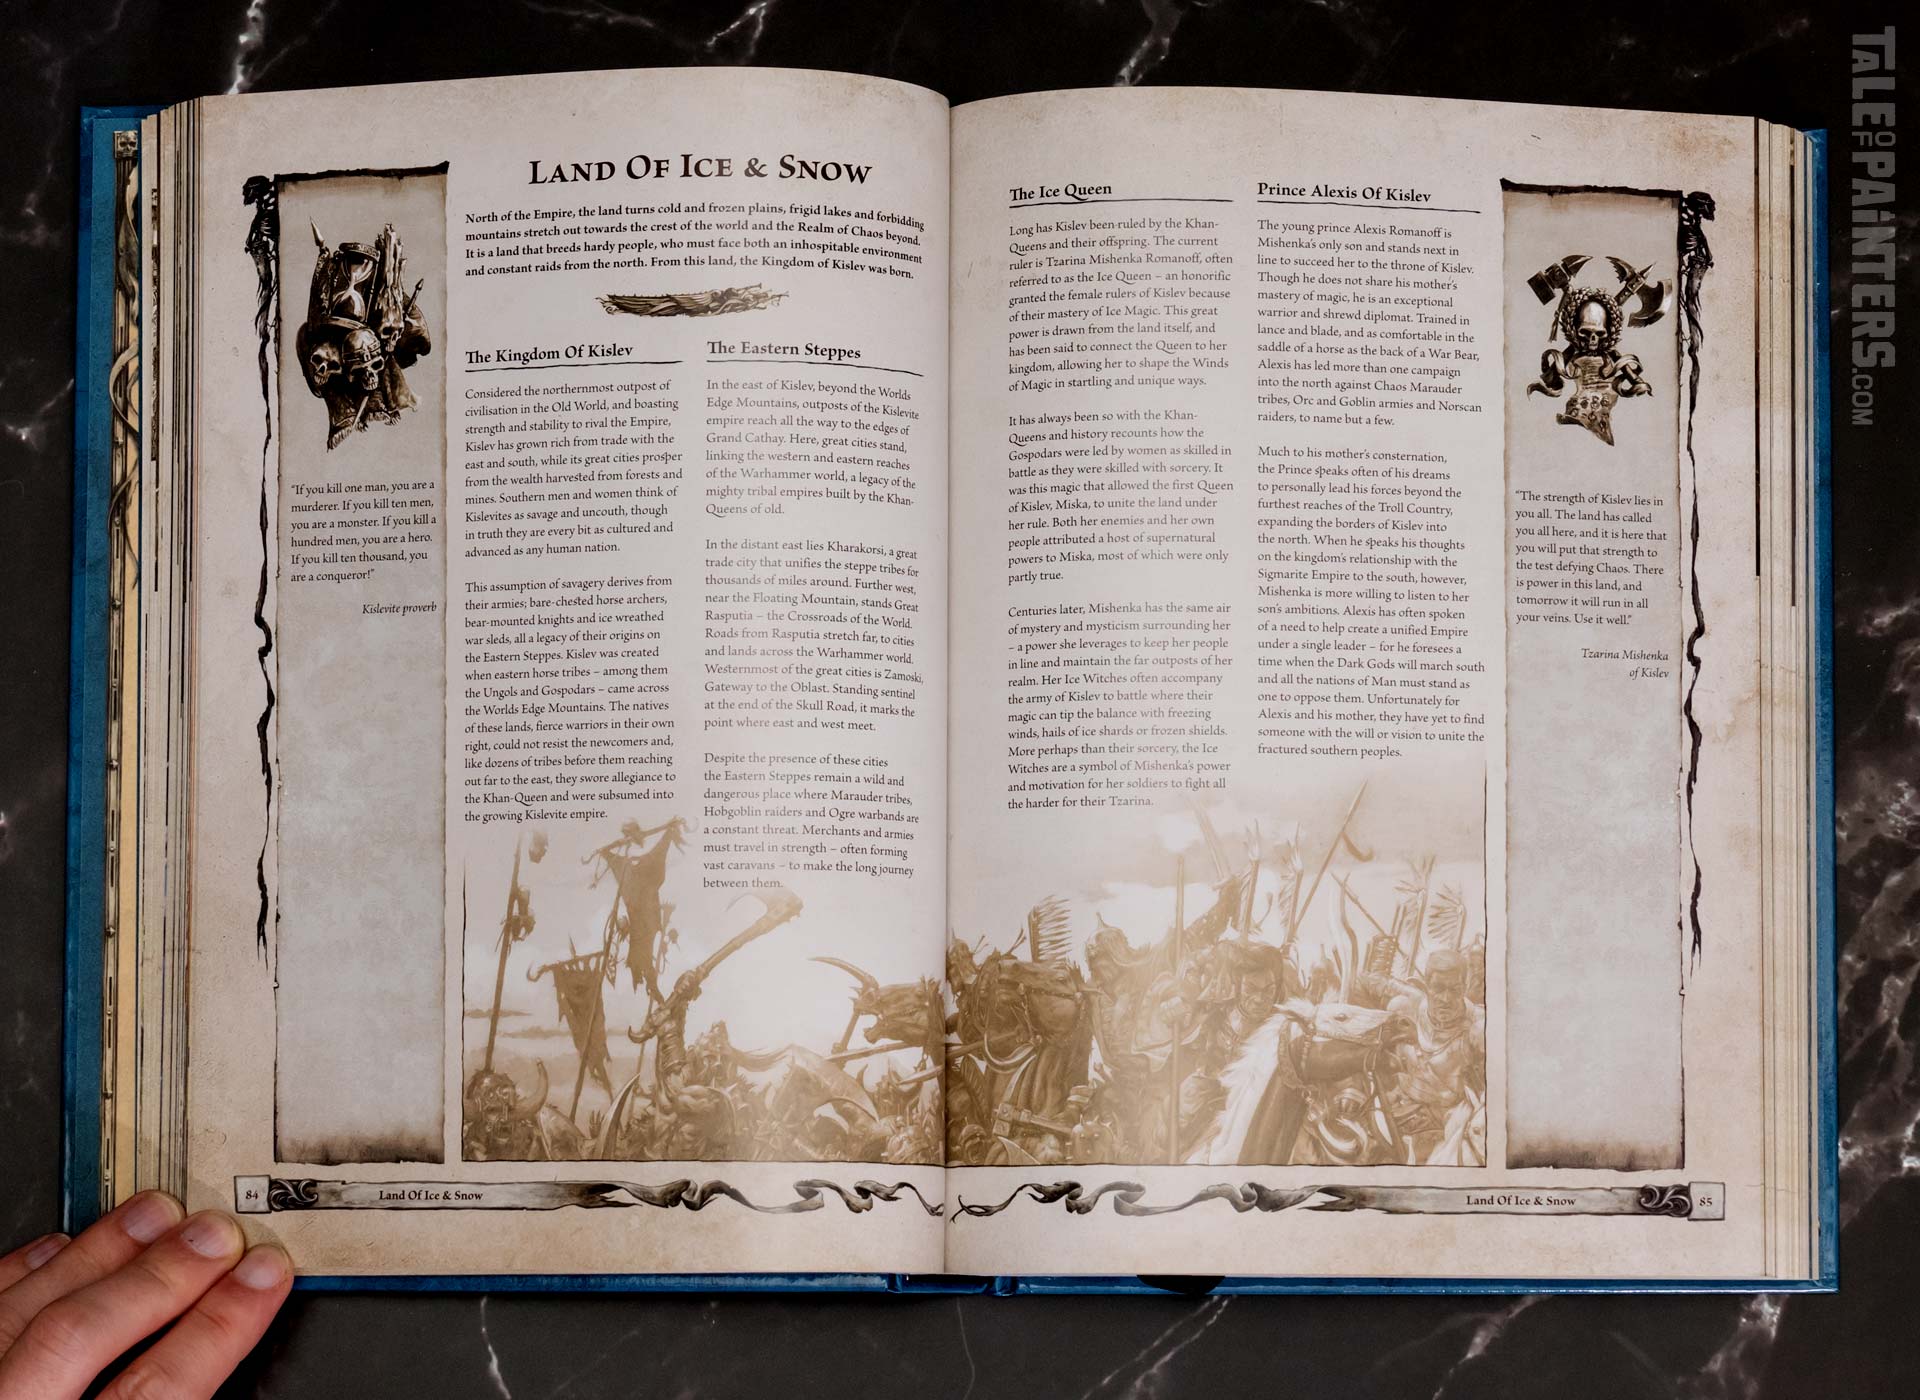 Warhammer: The Old World rulebook lore review